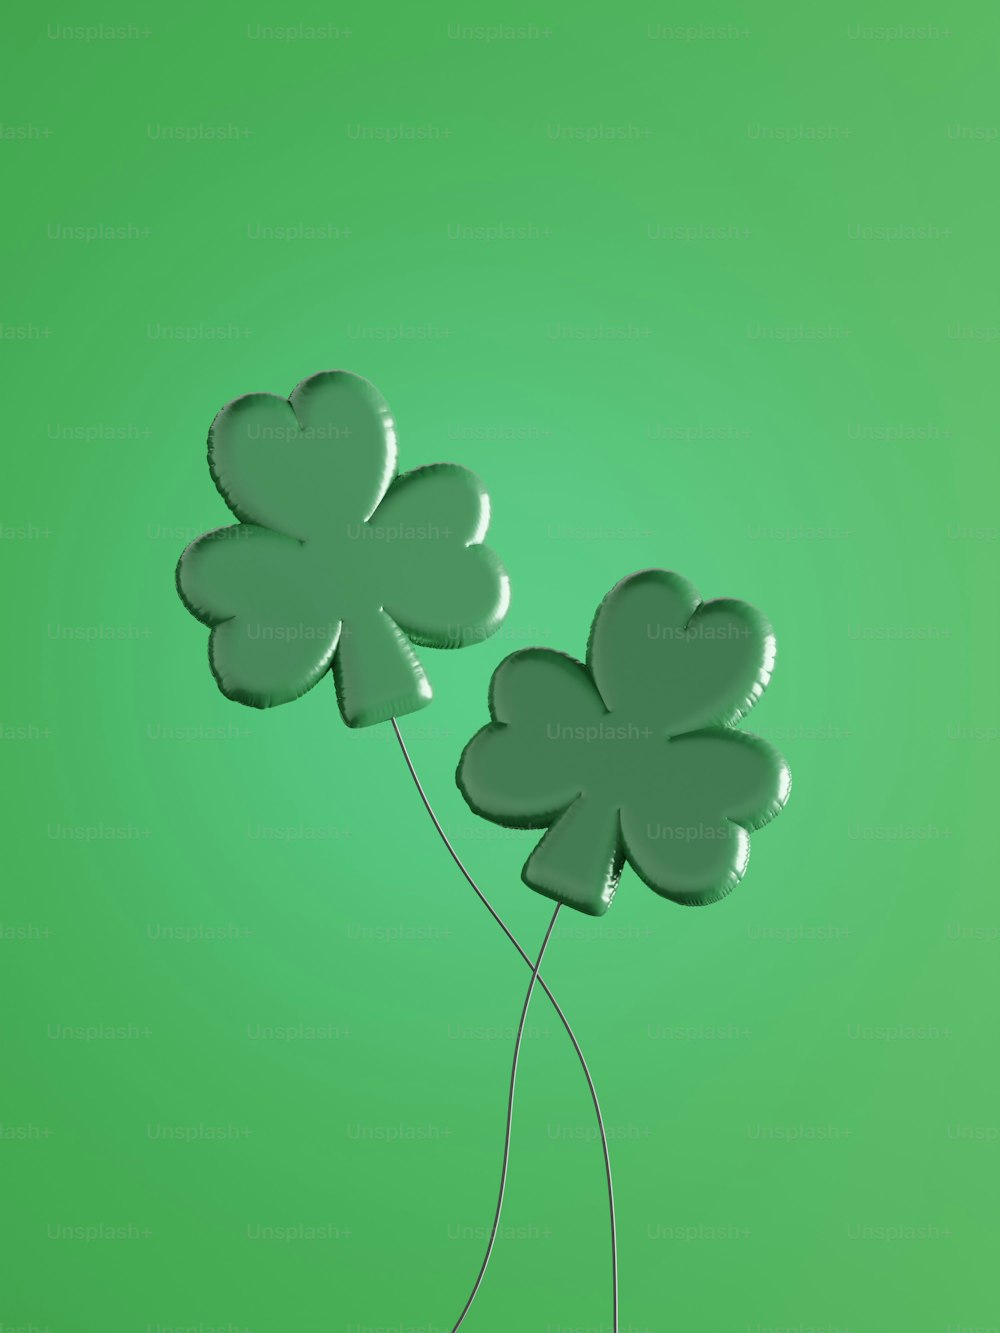 two balloons shaped like shamrocks on a green background